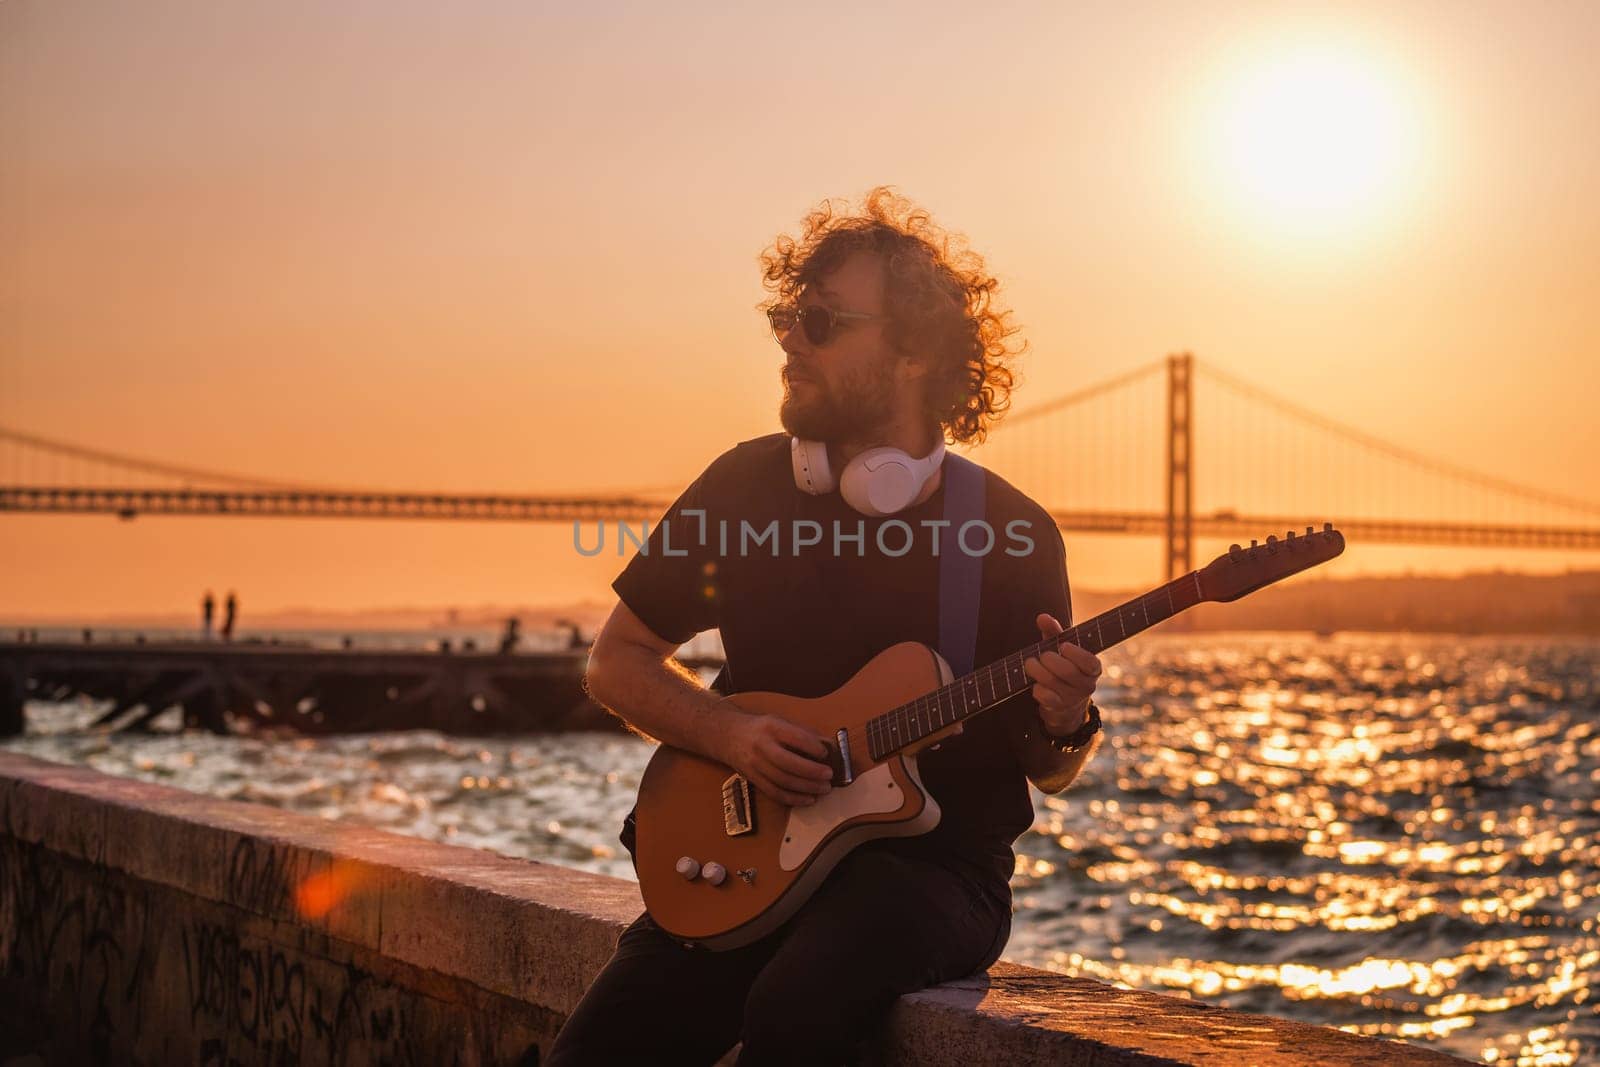 Hipster street rock musician in black playing electric guitar in the street on sunset on embankment with 25th of April bridge in background. Lisbon, Portugal